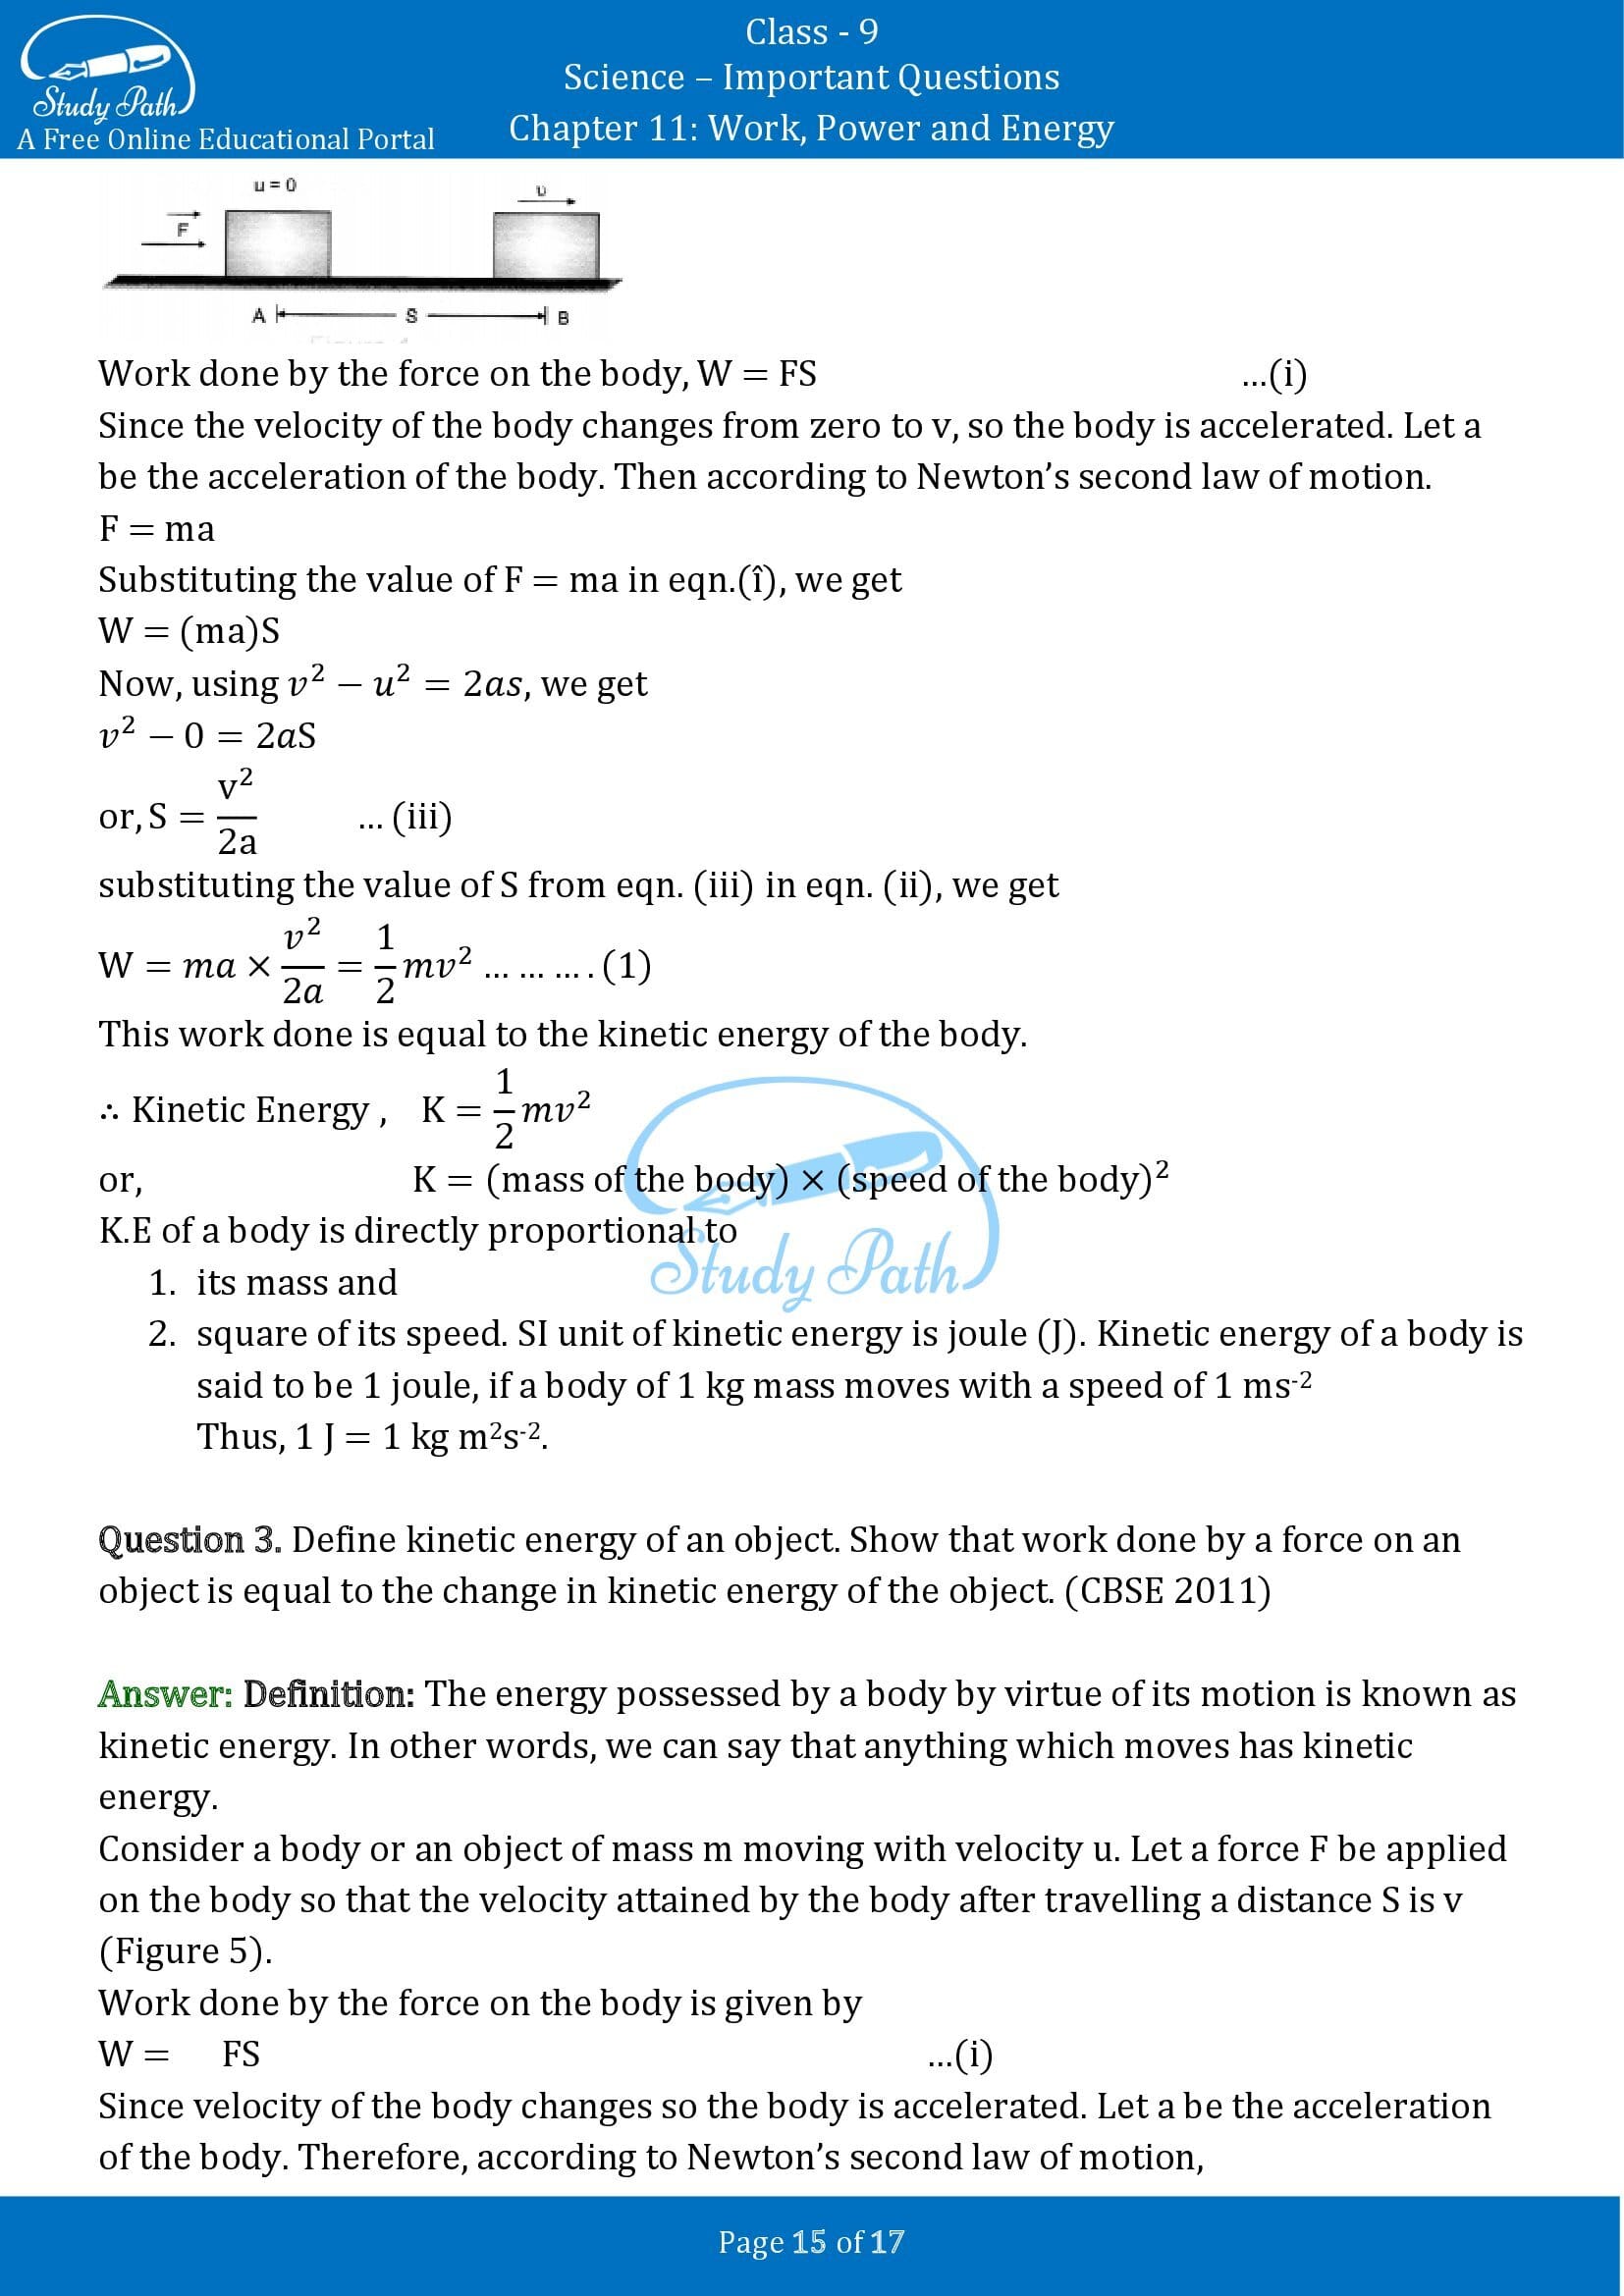 Important Questions for Class 9 Science Chapter 11 Work Power and Energy 00015